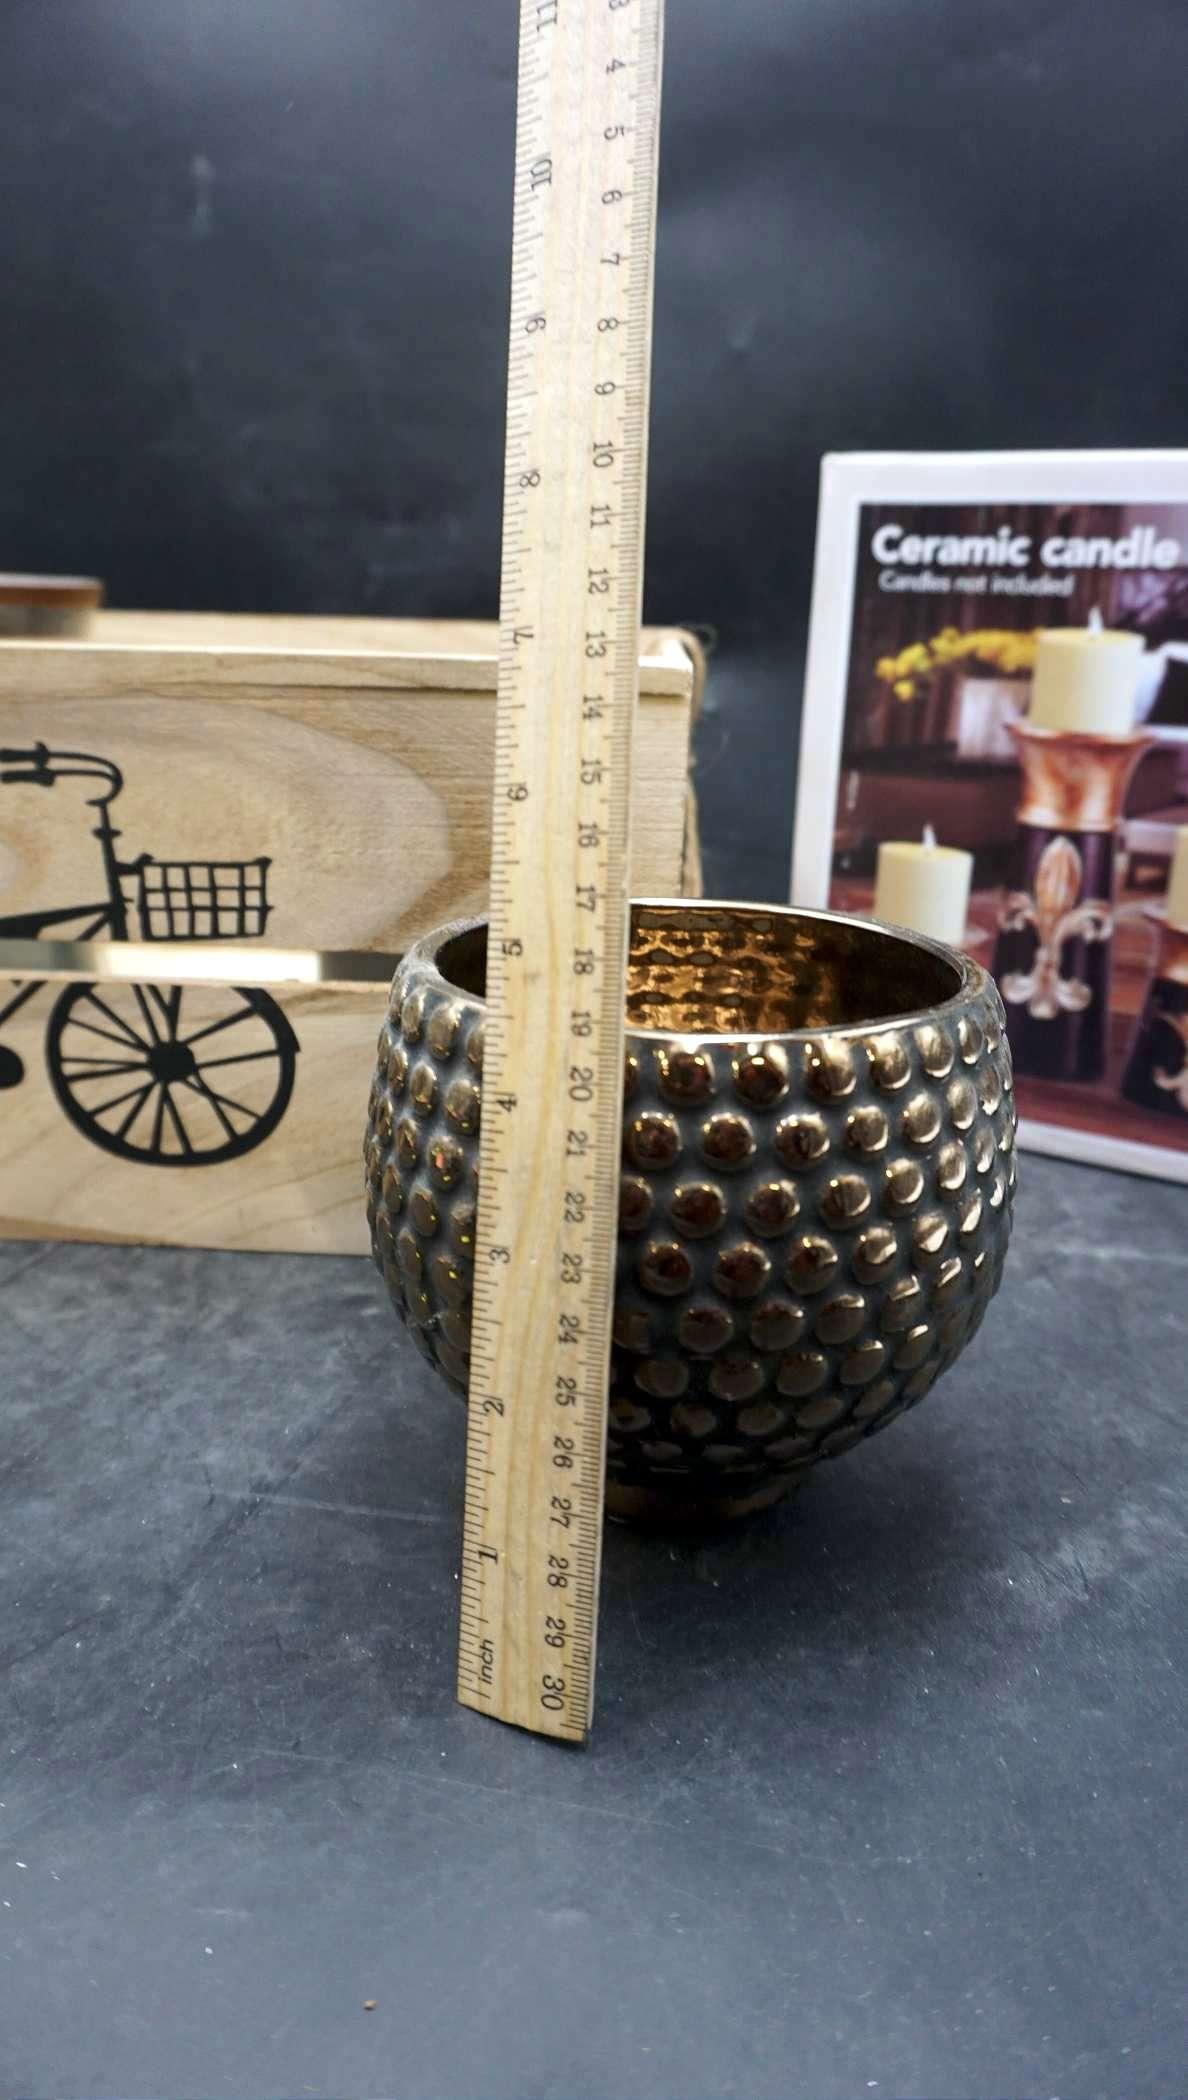 Wooden Bicycle Crate, Candles, Ceramic Candle Holders